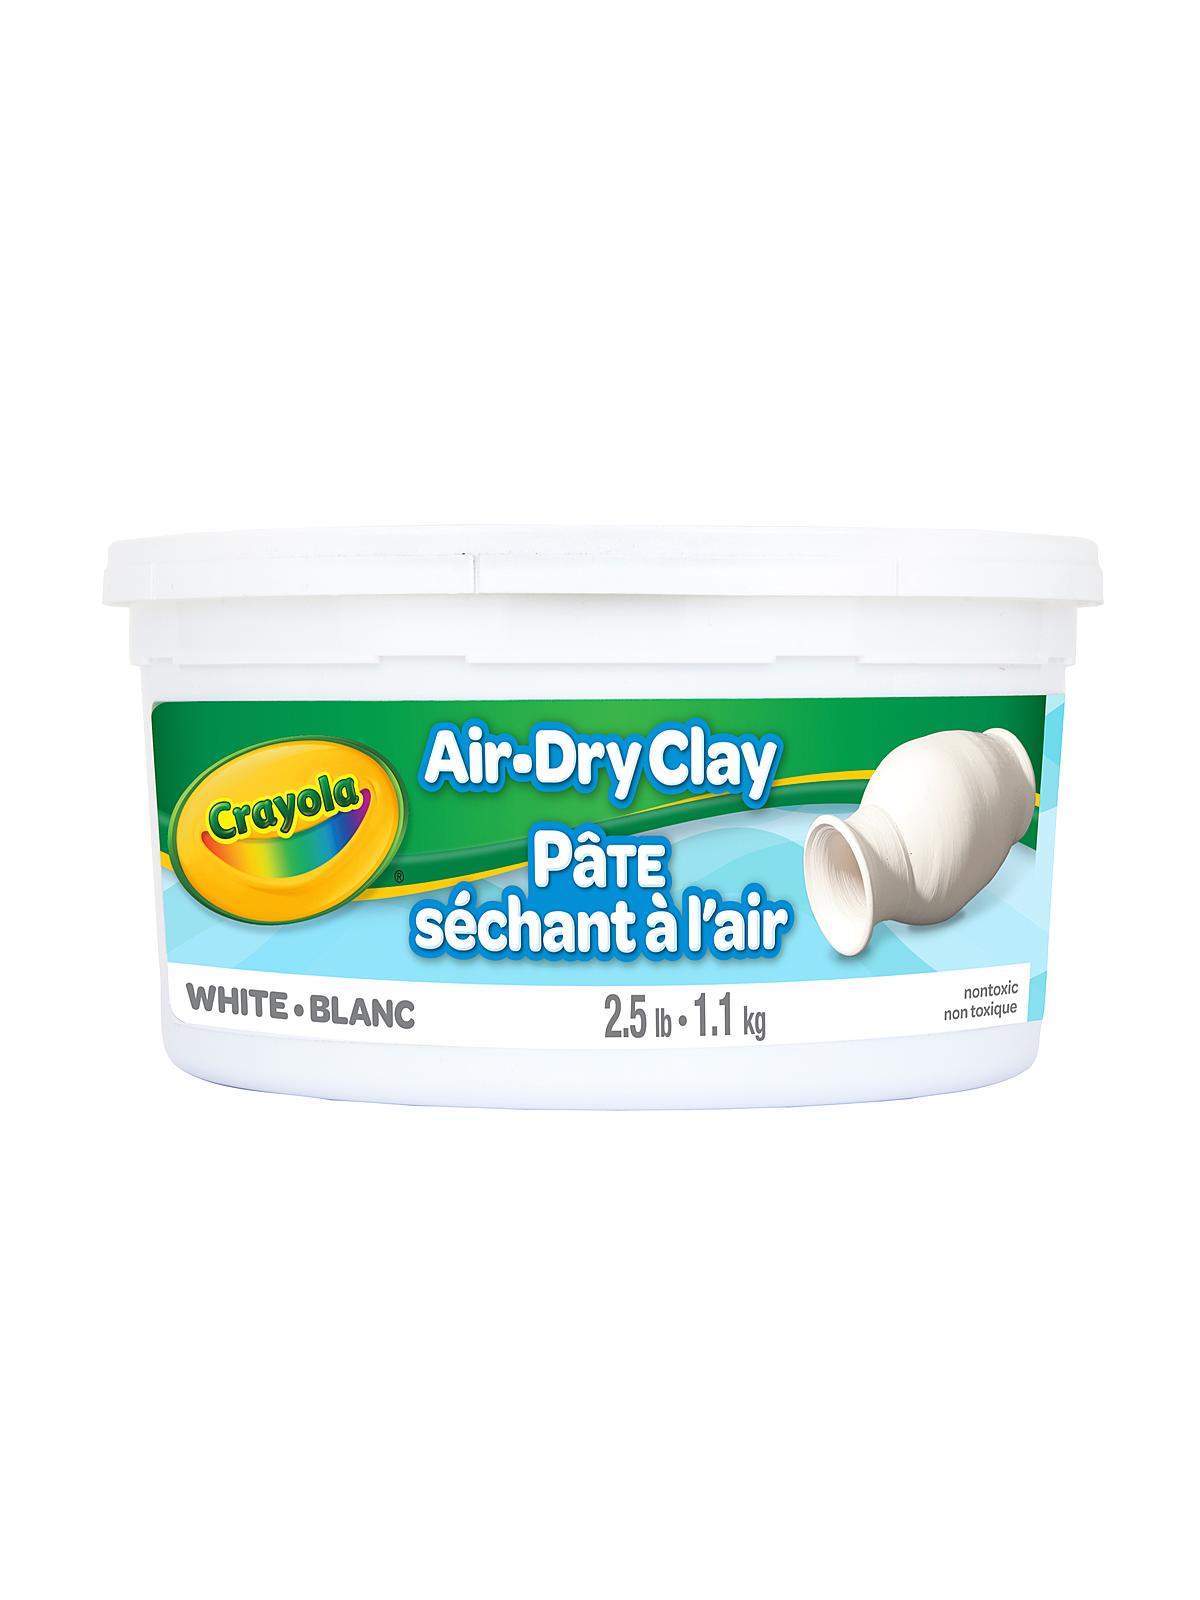 Crayola Air-Dry Clay, Terra Cotta, 2.5 lb Tub, Pack of 4 at